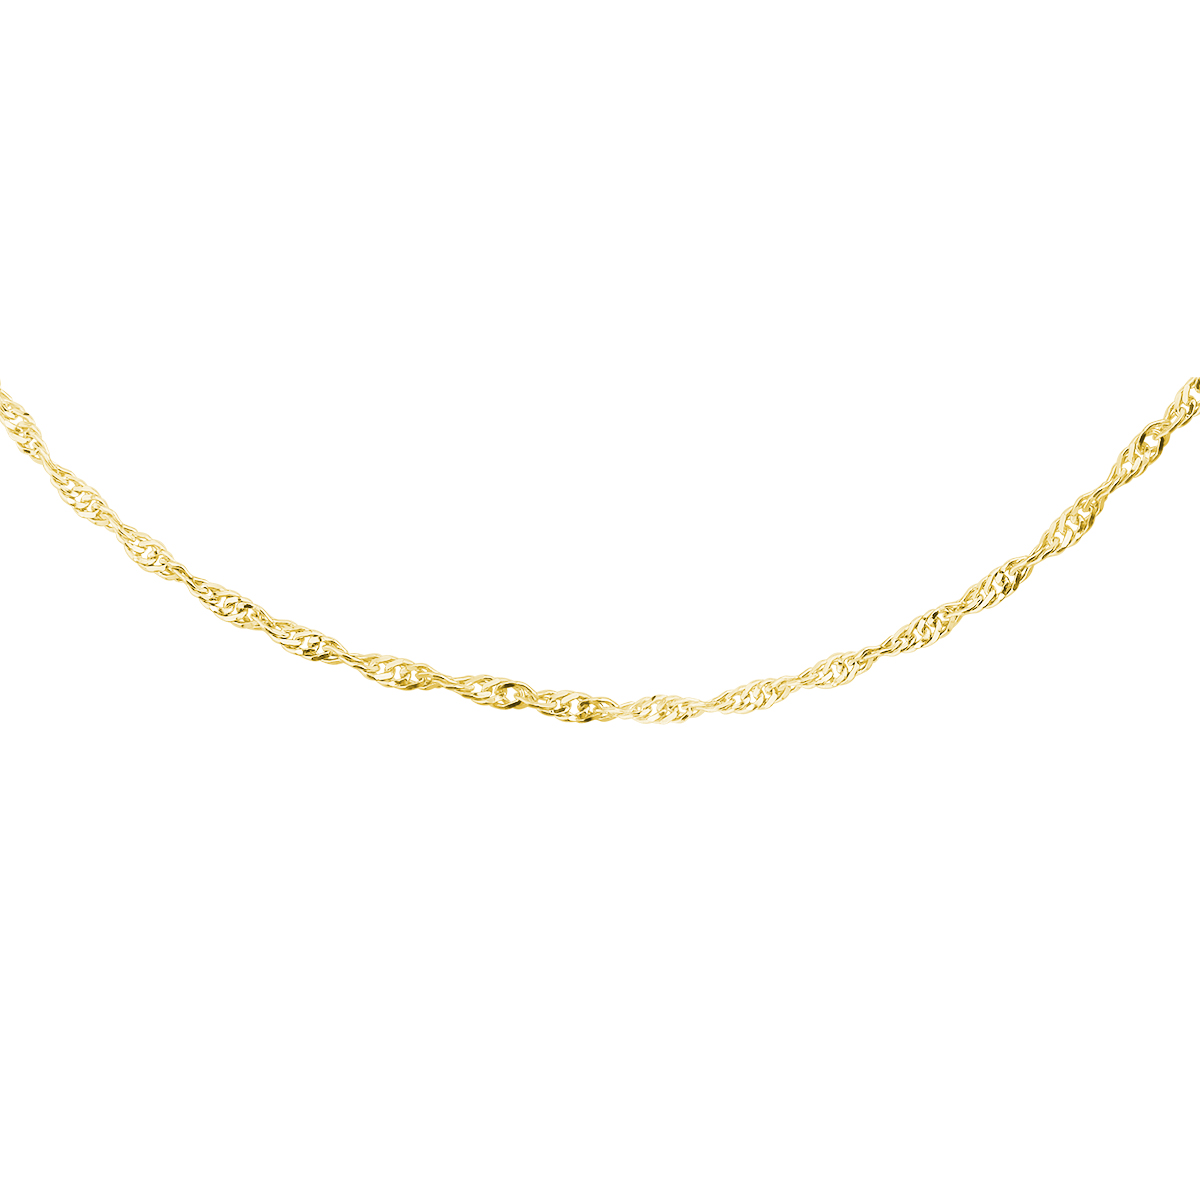 yacht necklace gold plated